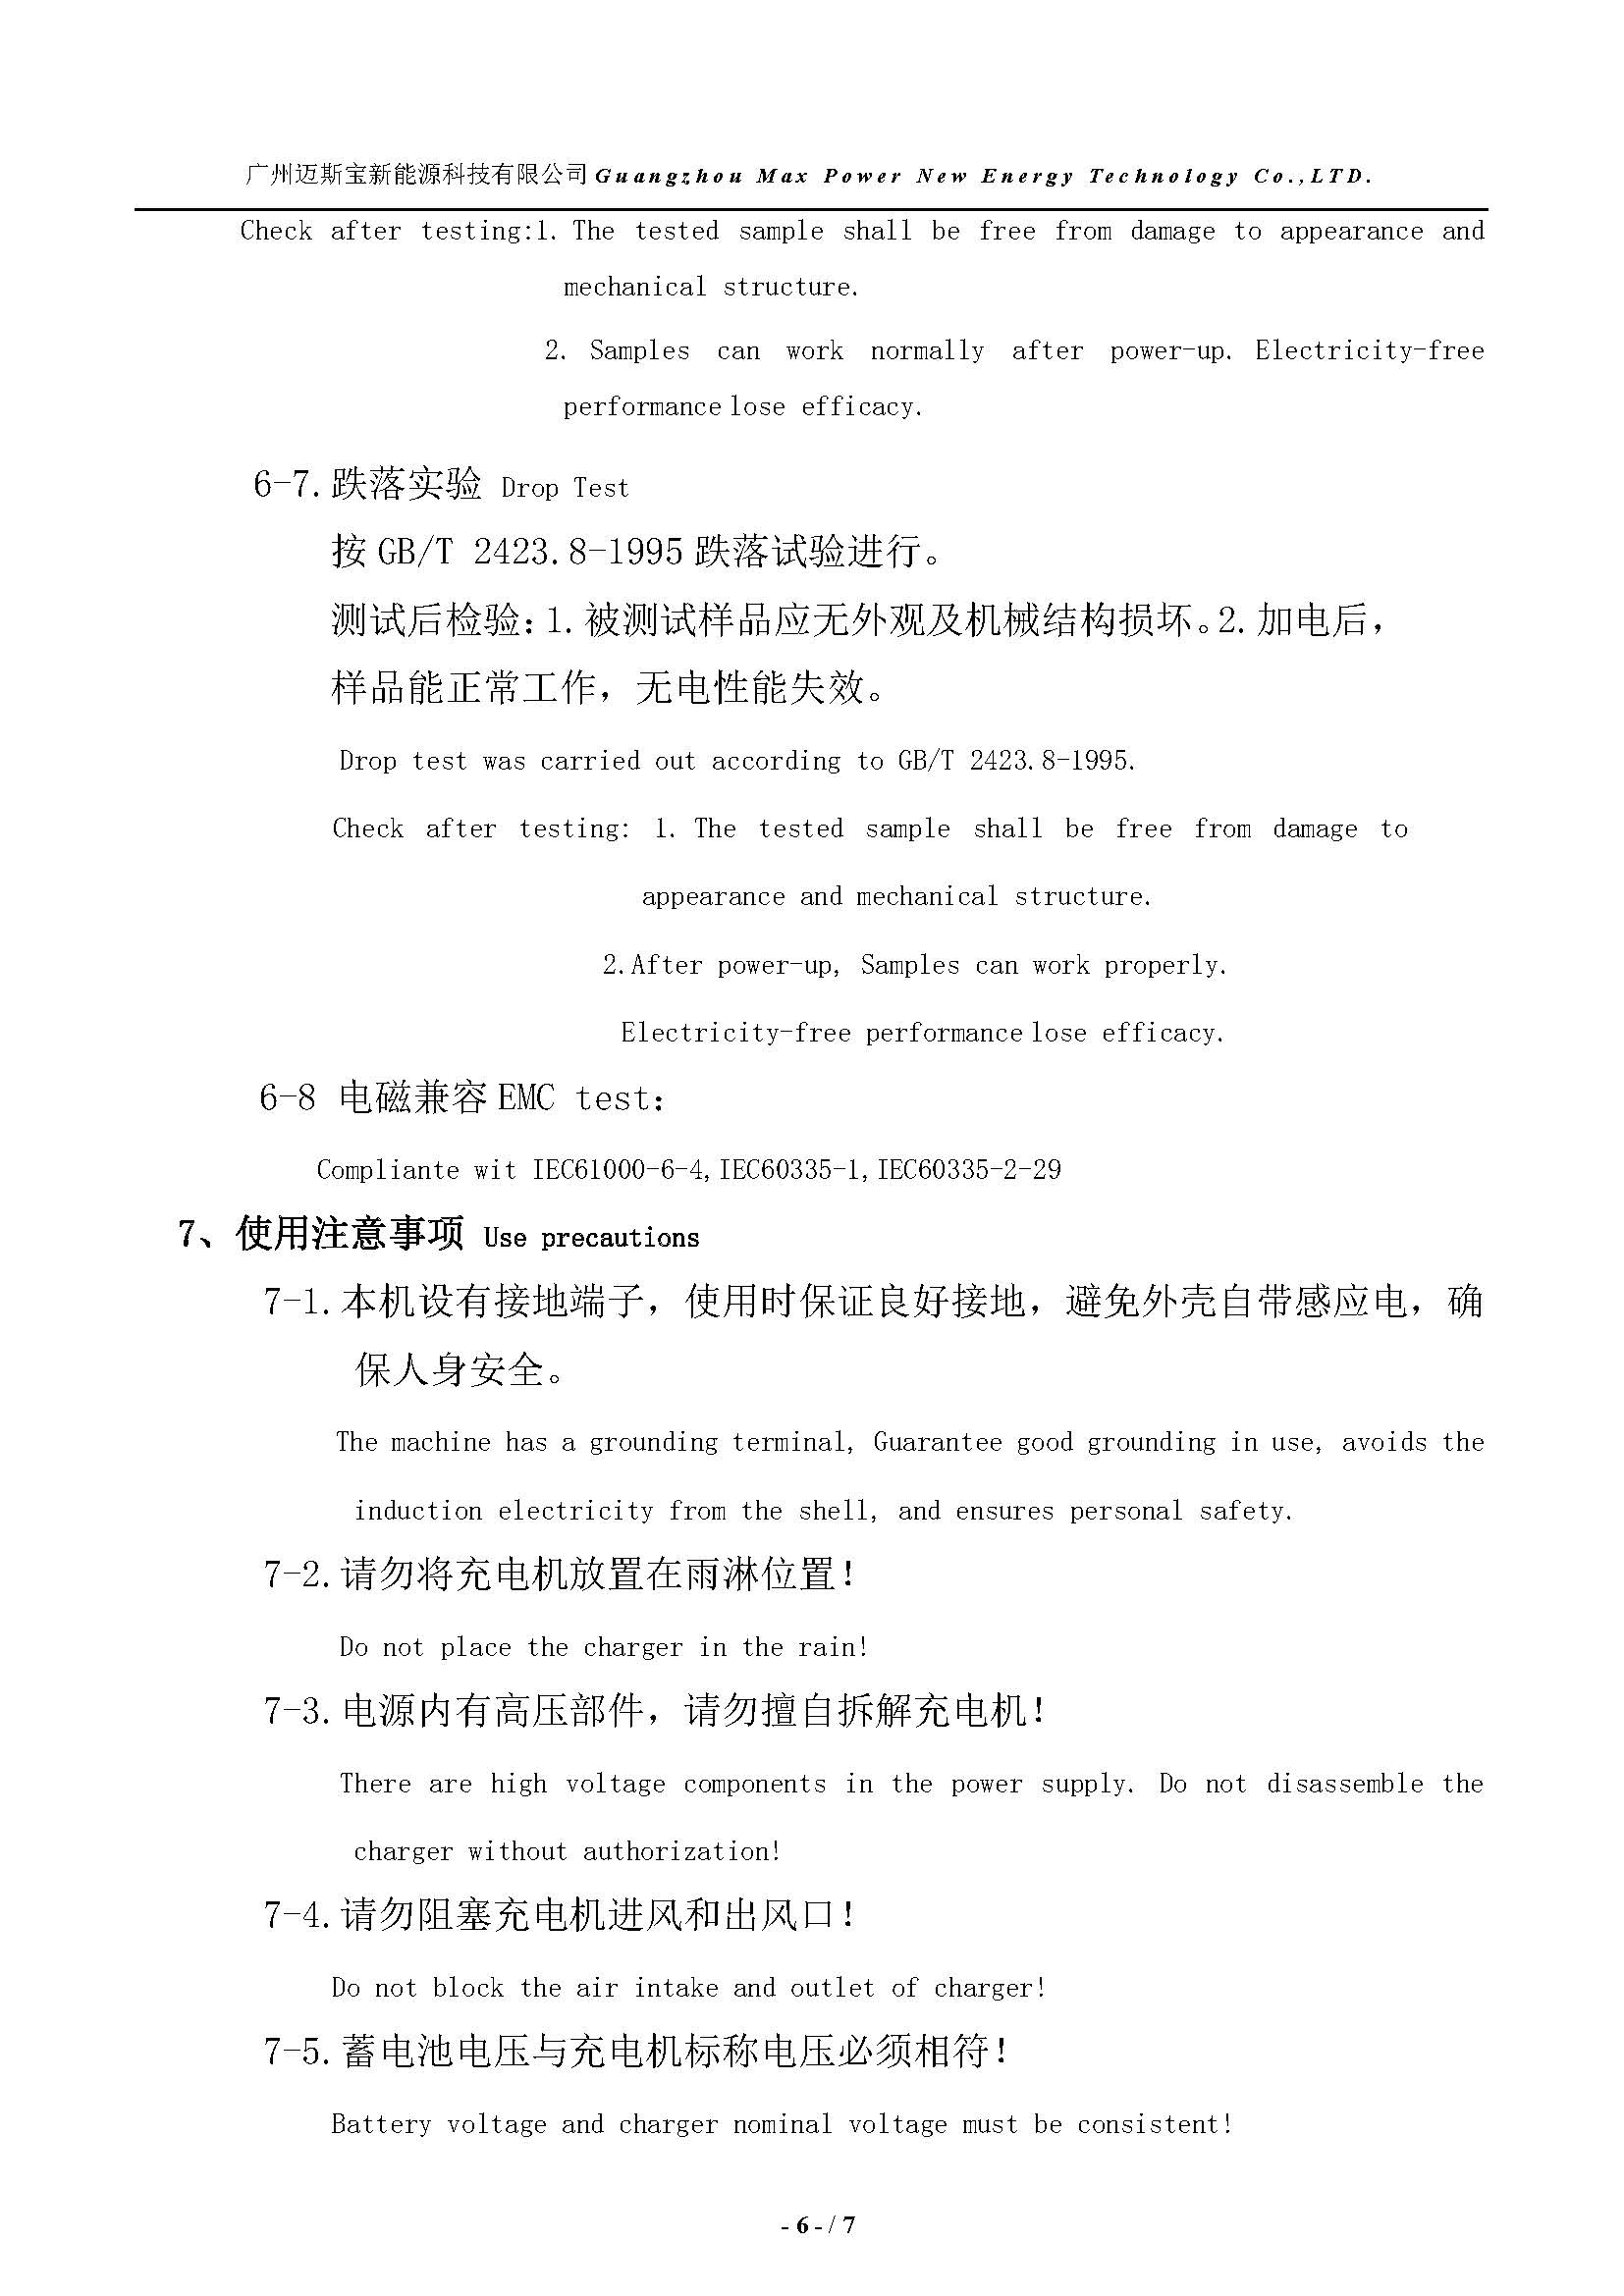 OBC4830_product specification_V1.0_0117_2021_页面_6.jpg